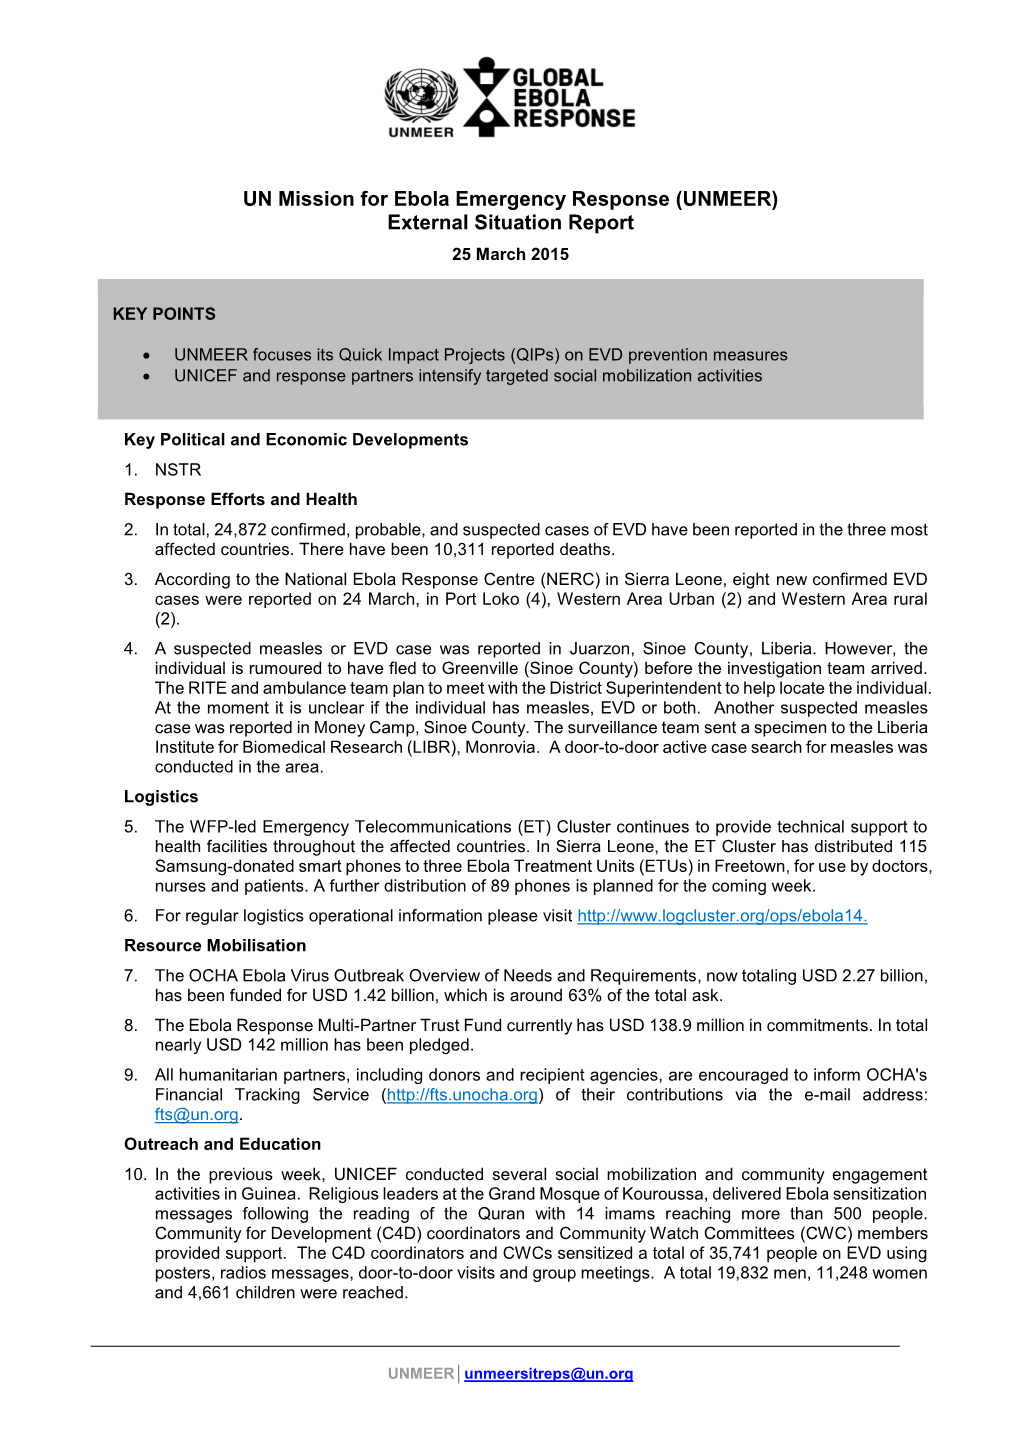 UN Mission for Ebola Emergency Response (UNMEER) External Situation Report 25 March 2015